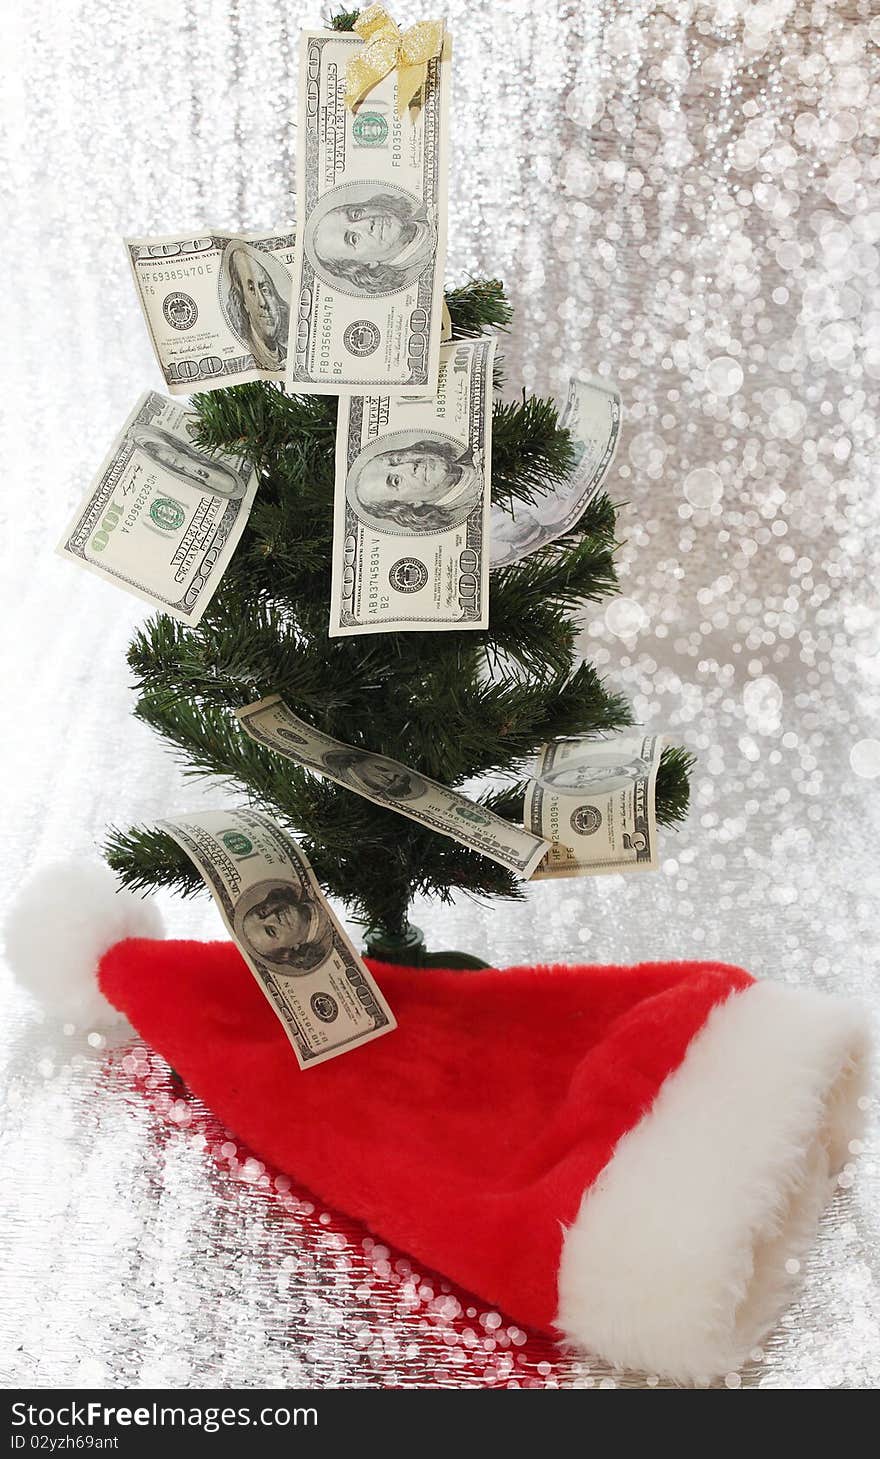 Christmas tree is decorated with the money